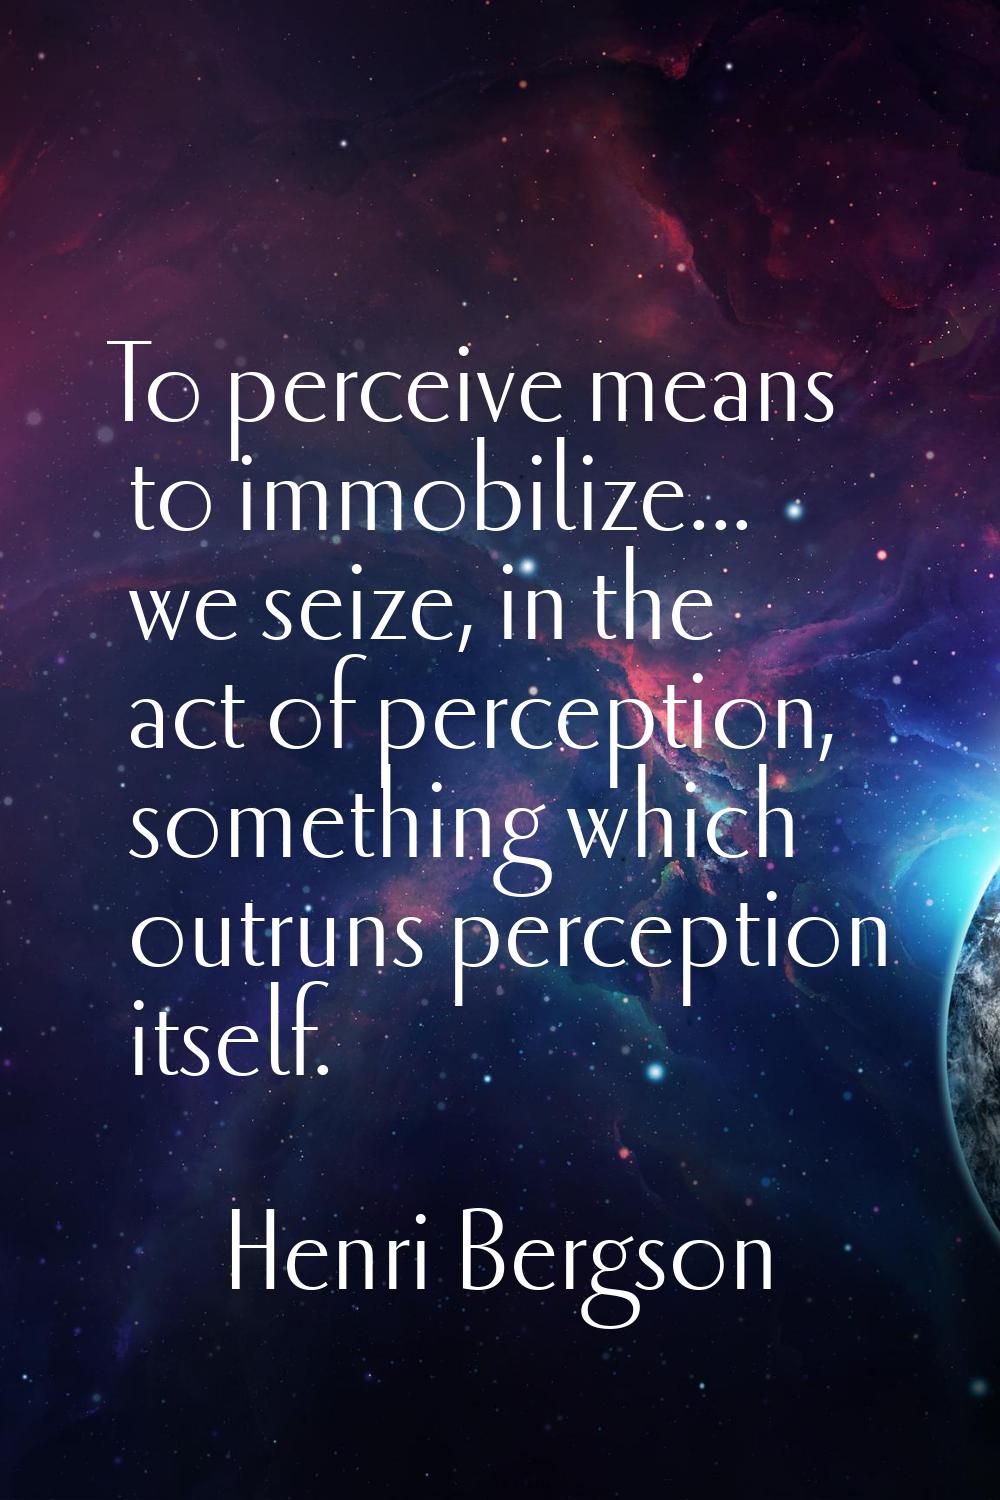 To perceive means to immobilize... we seize, in the act of perception, something which outruns perc